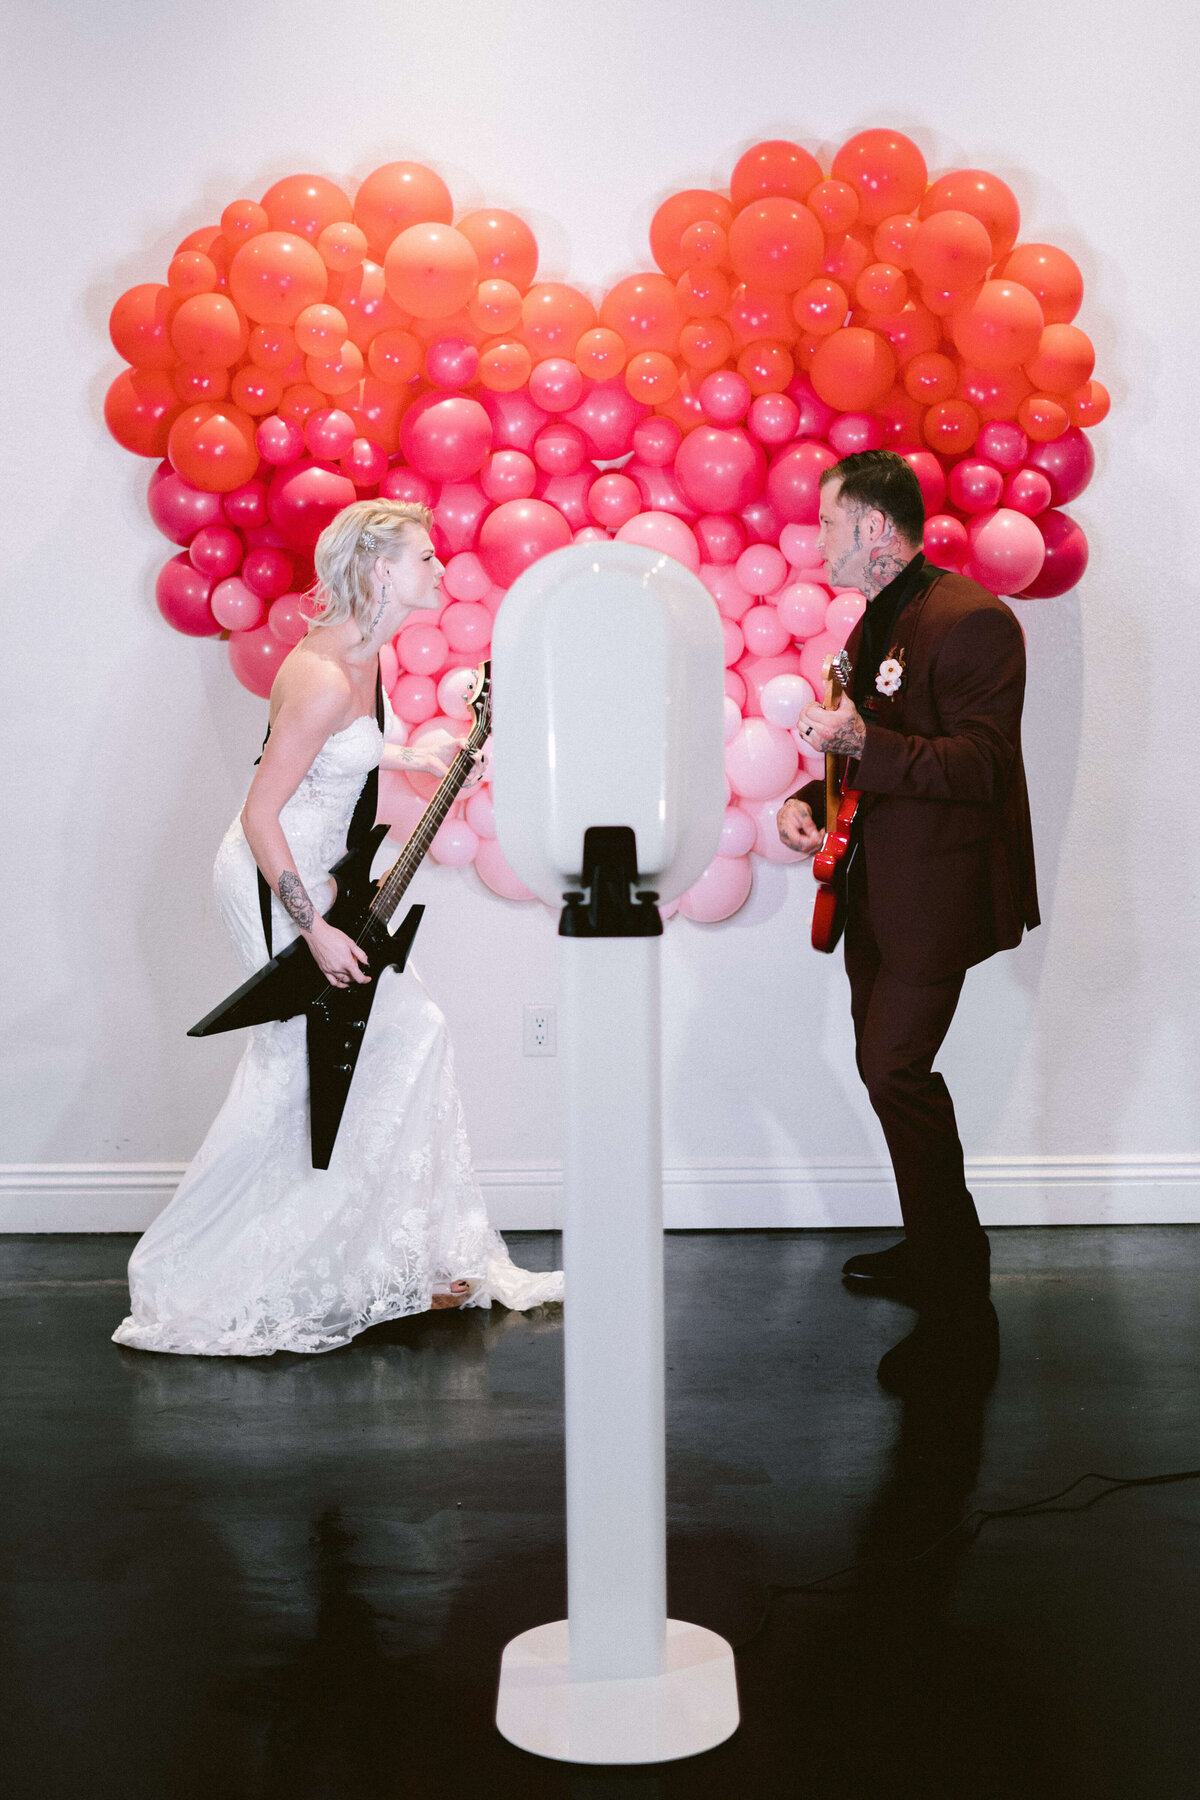 Bride and groom holding a guitar as a props for their photo booth picture with colorful heart shaped balloon backgrounf